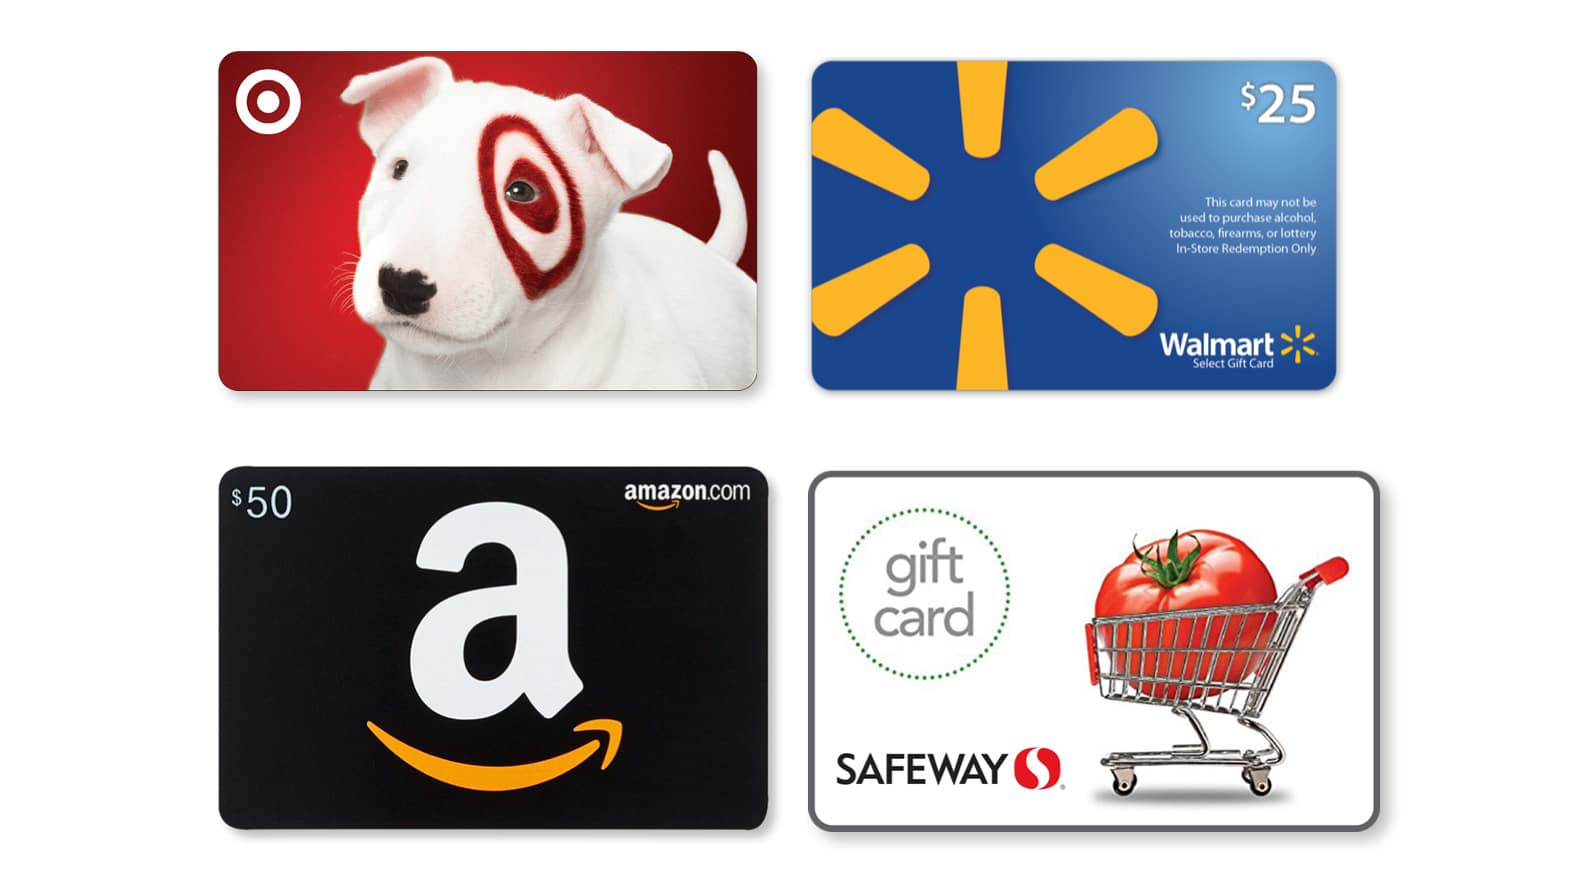 Give A Gift Card Website Featured Image